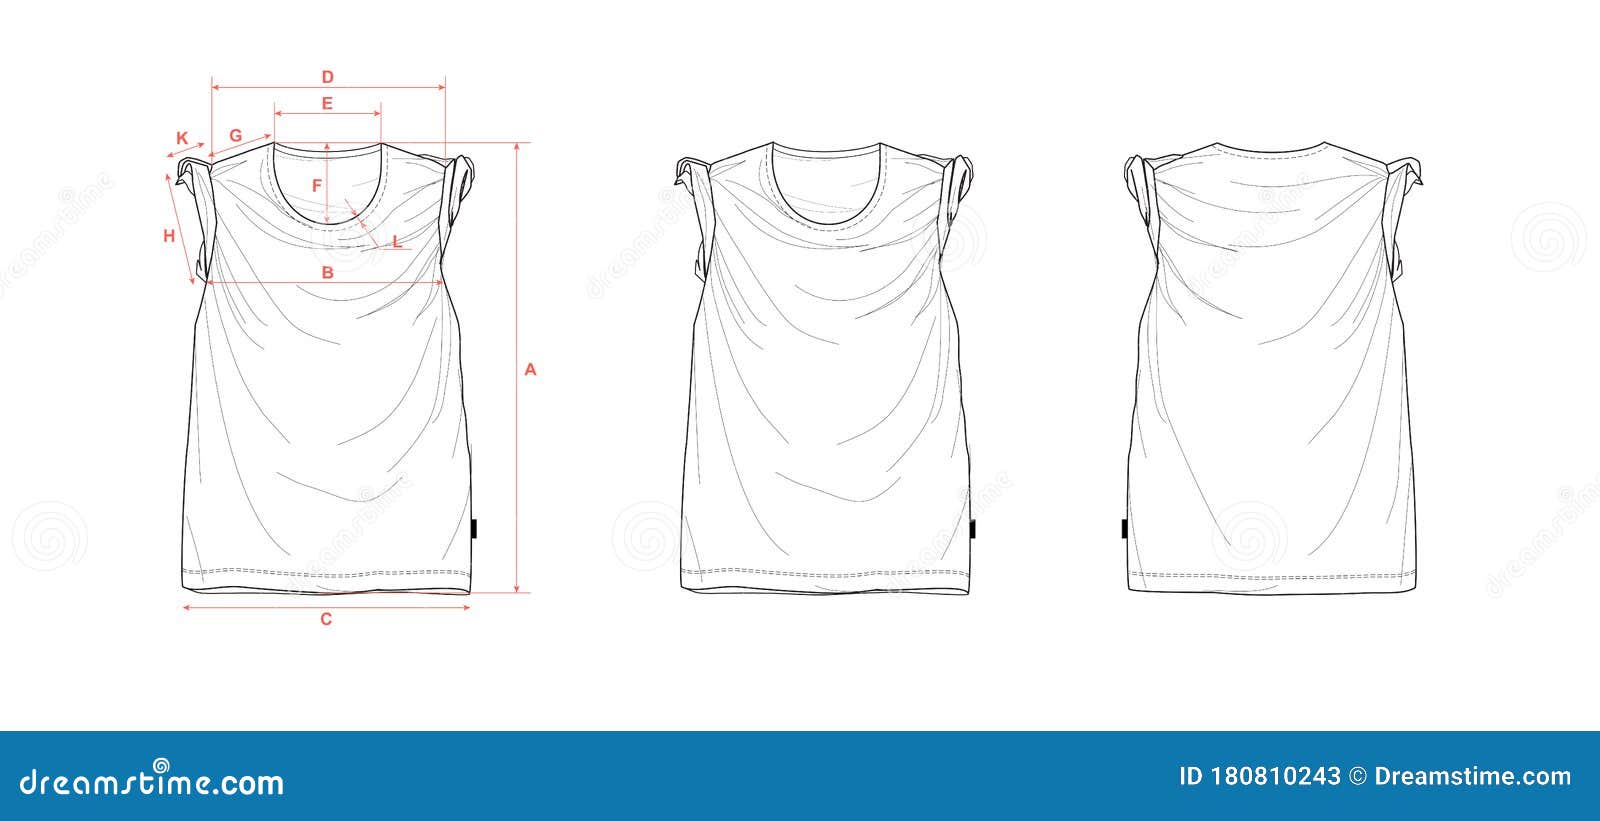 Cowl Neck Dress Cad with Actual Dress by Gabrielle on Dribbble